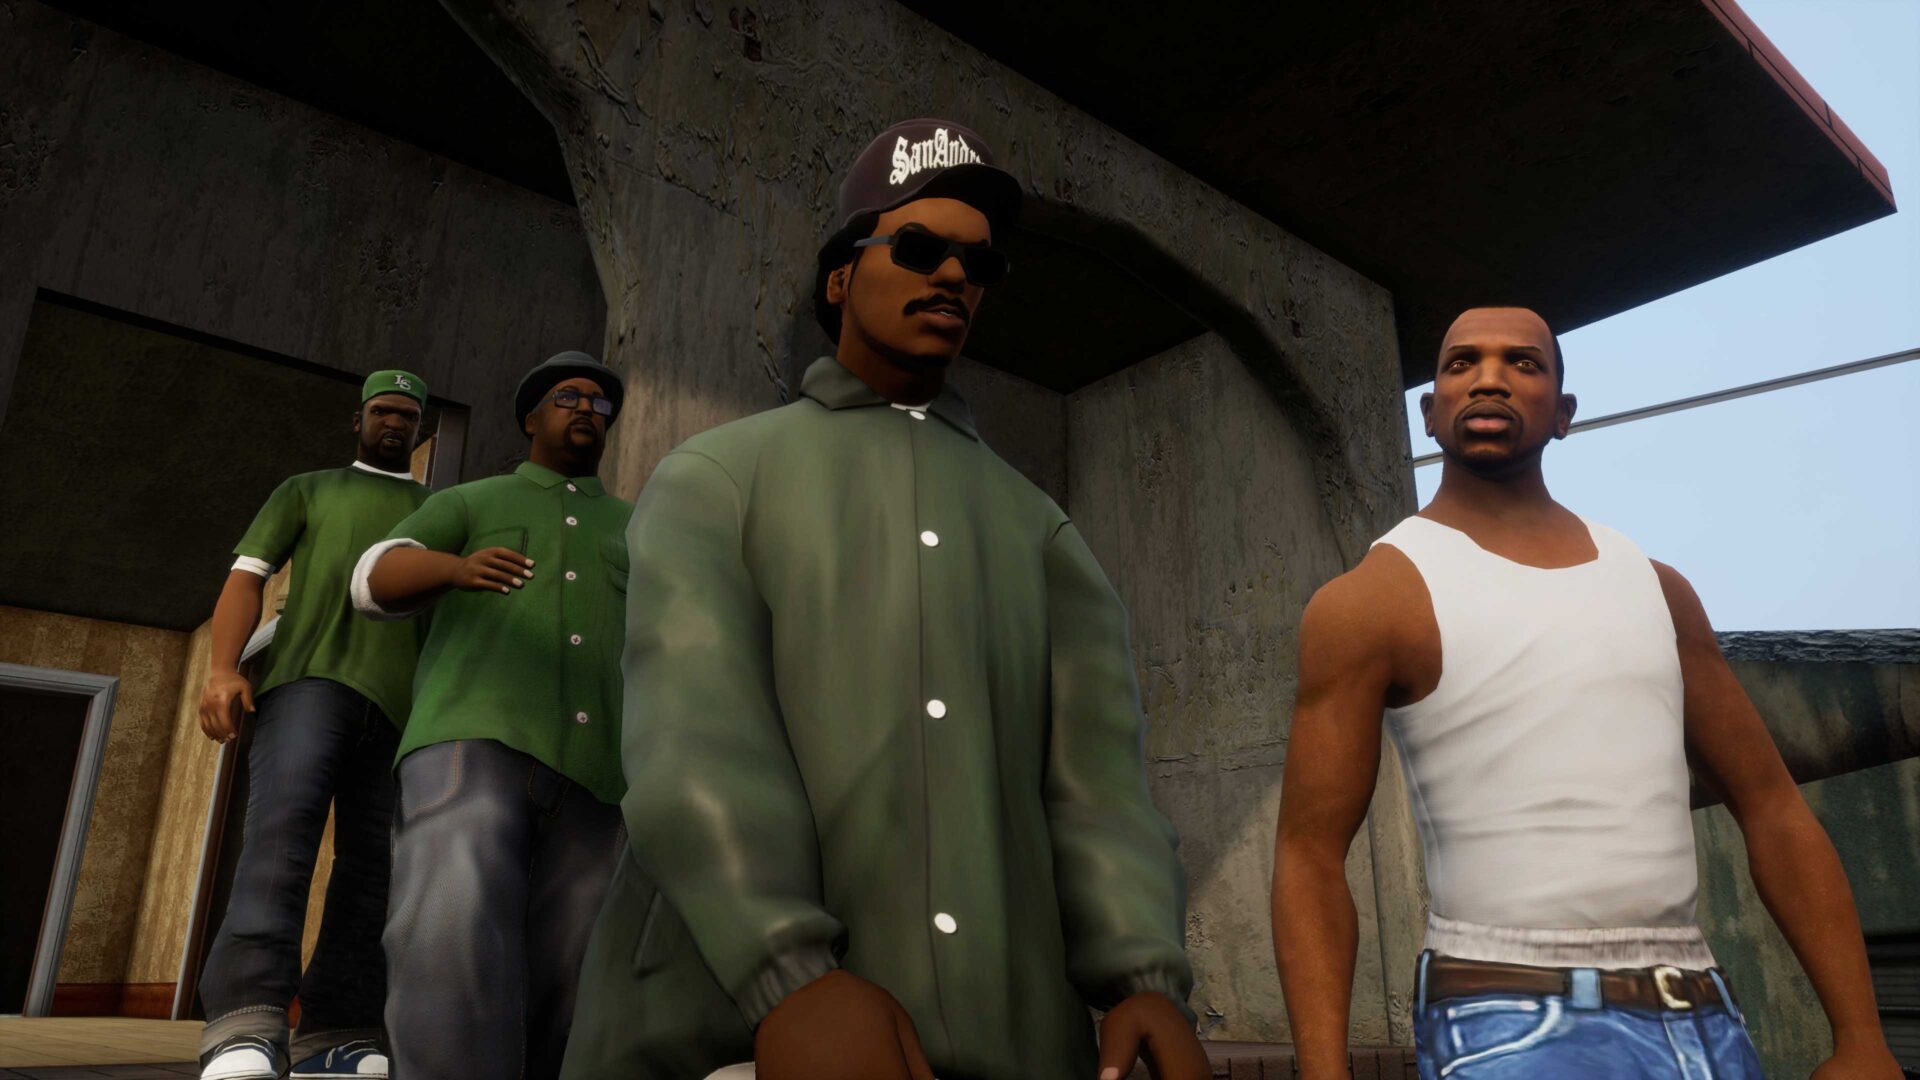 GTA: The Trilogy - The Definitive Edition - San Andreas